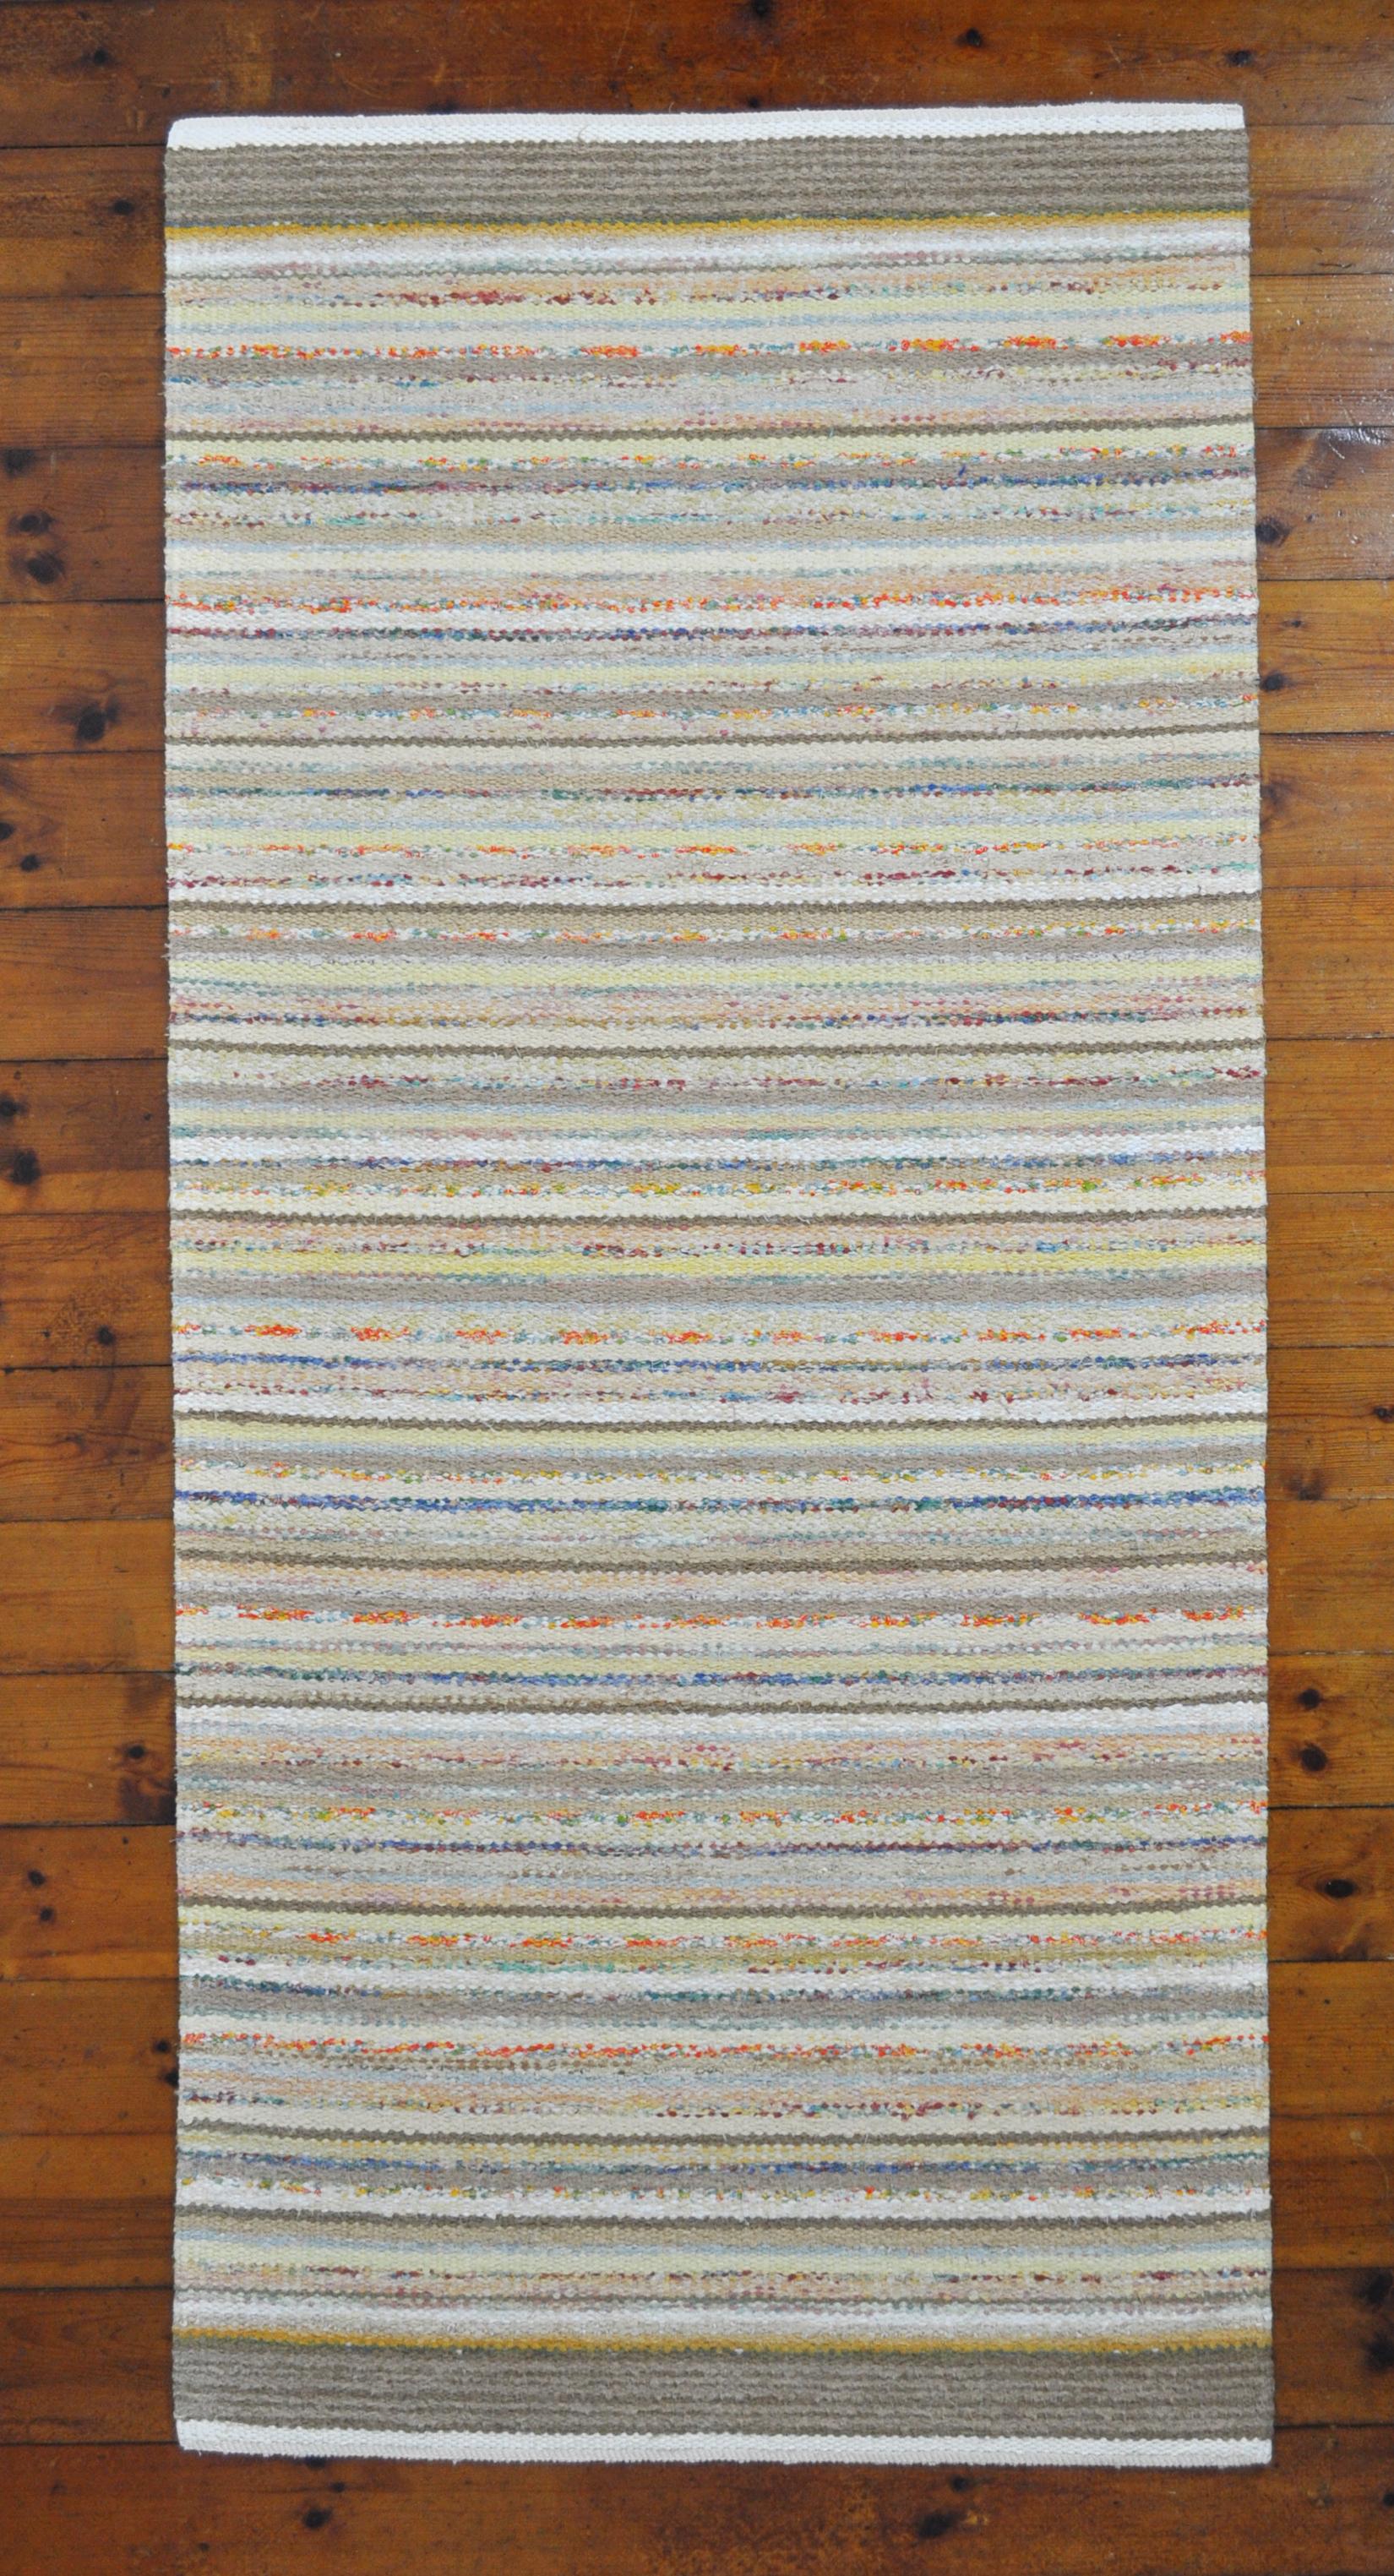 Unique Danish rug in recycled colored materials. Handwoven in the traditions of Scandinavian rugs. High quality craftsmanship by MB handwoven rugs. Can be washed without loosing color or shape.